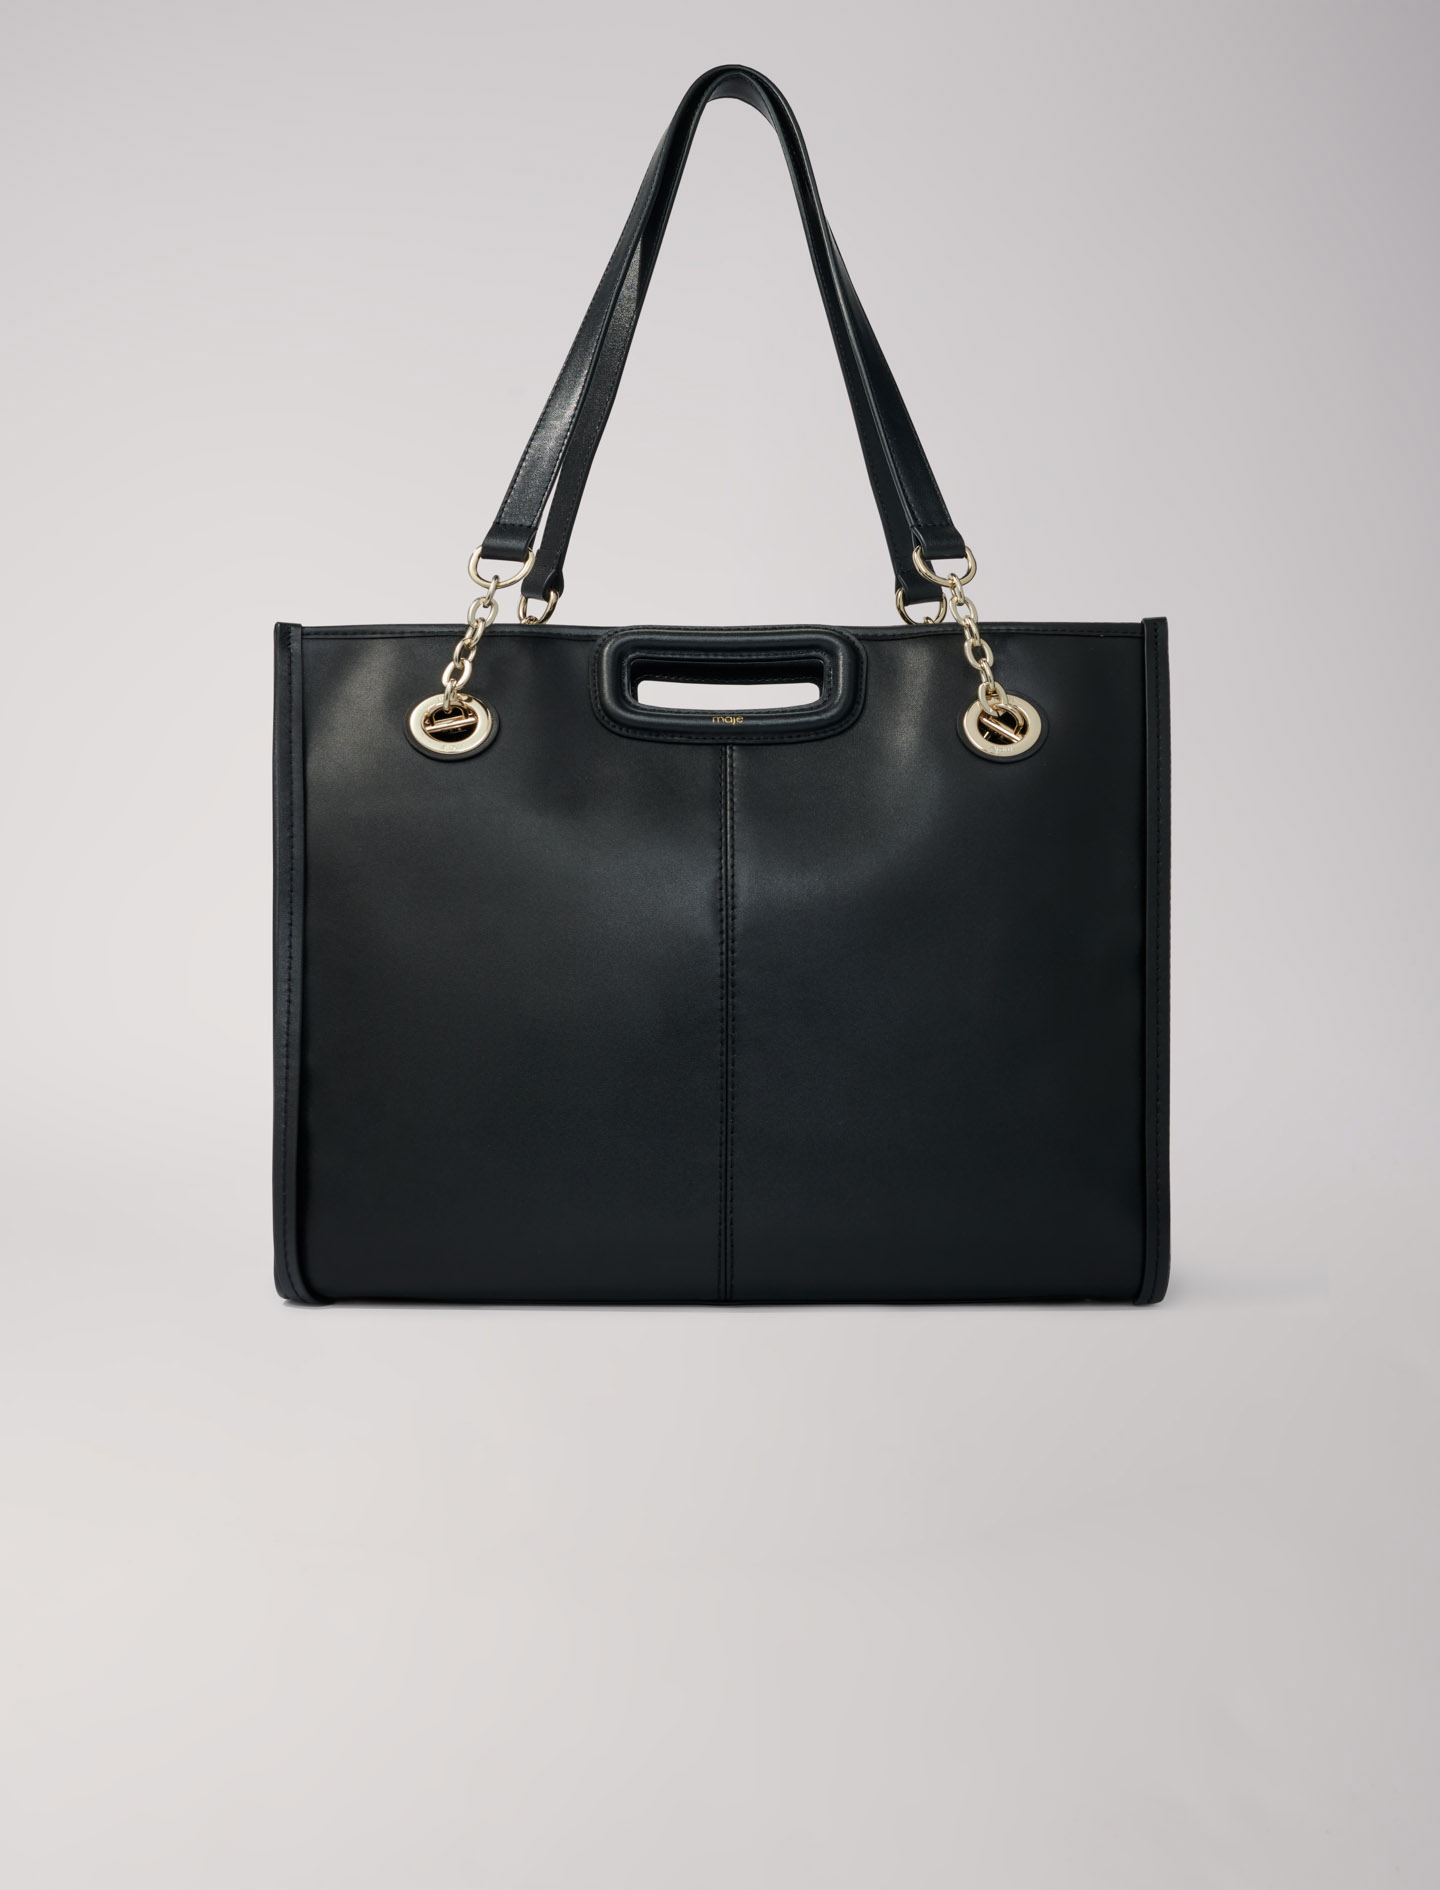 Maje Woman's polyester Eyelet: Leather tote bag for Spring/Summer, in color Black / Black